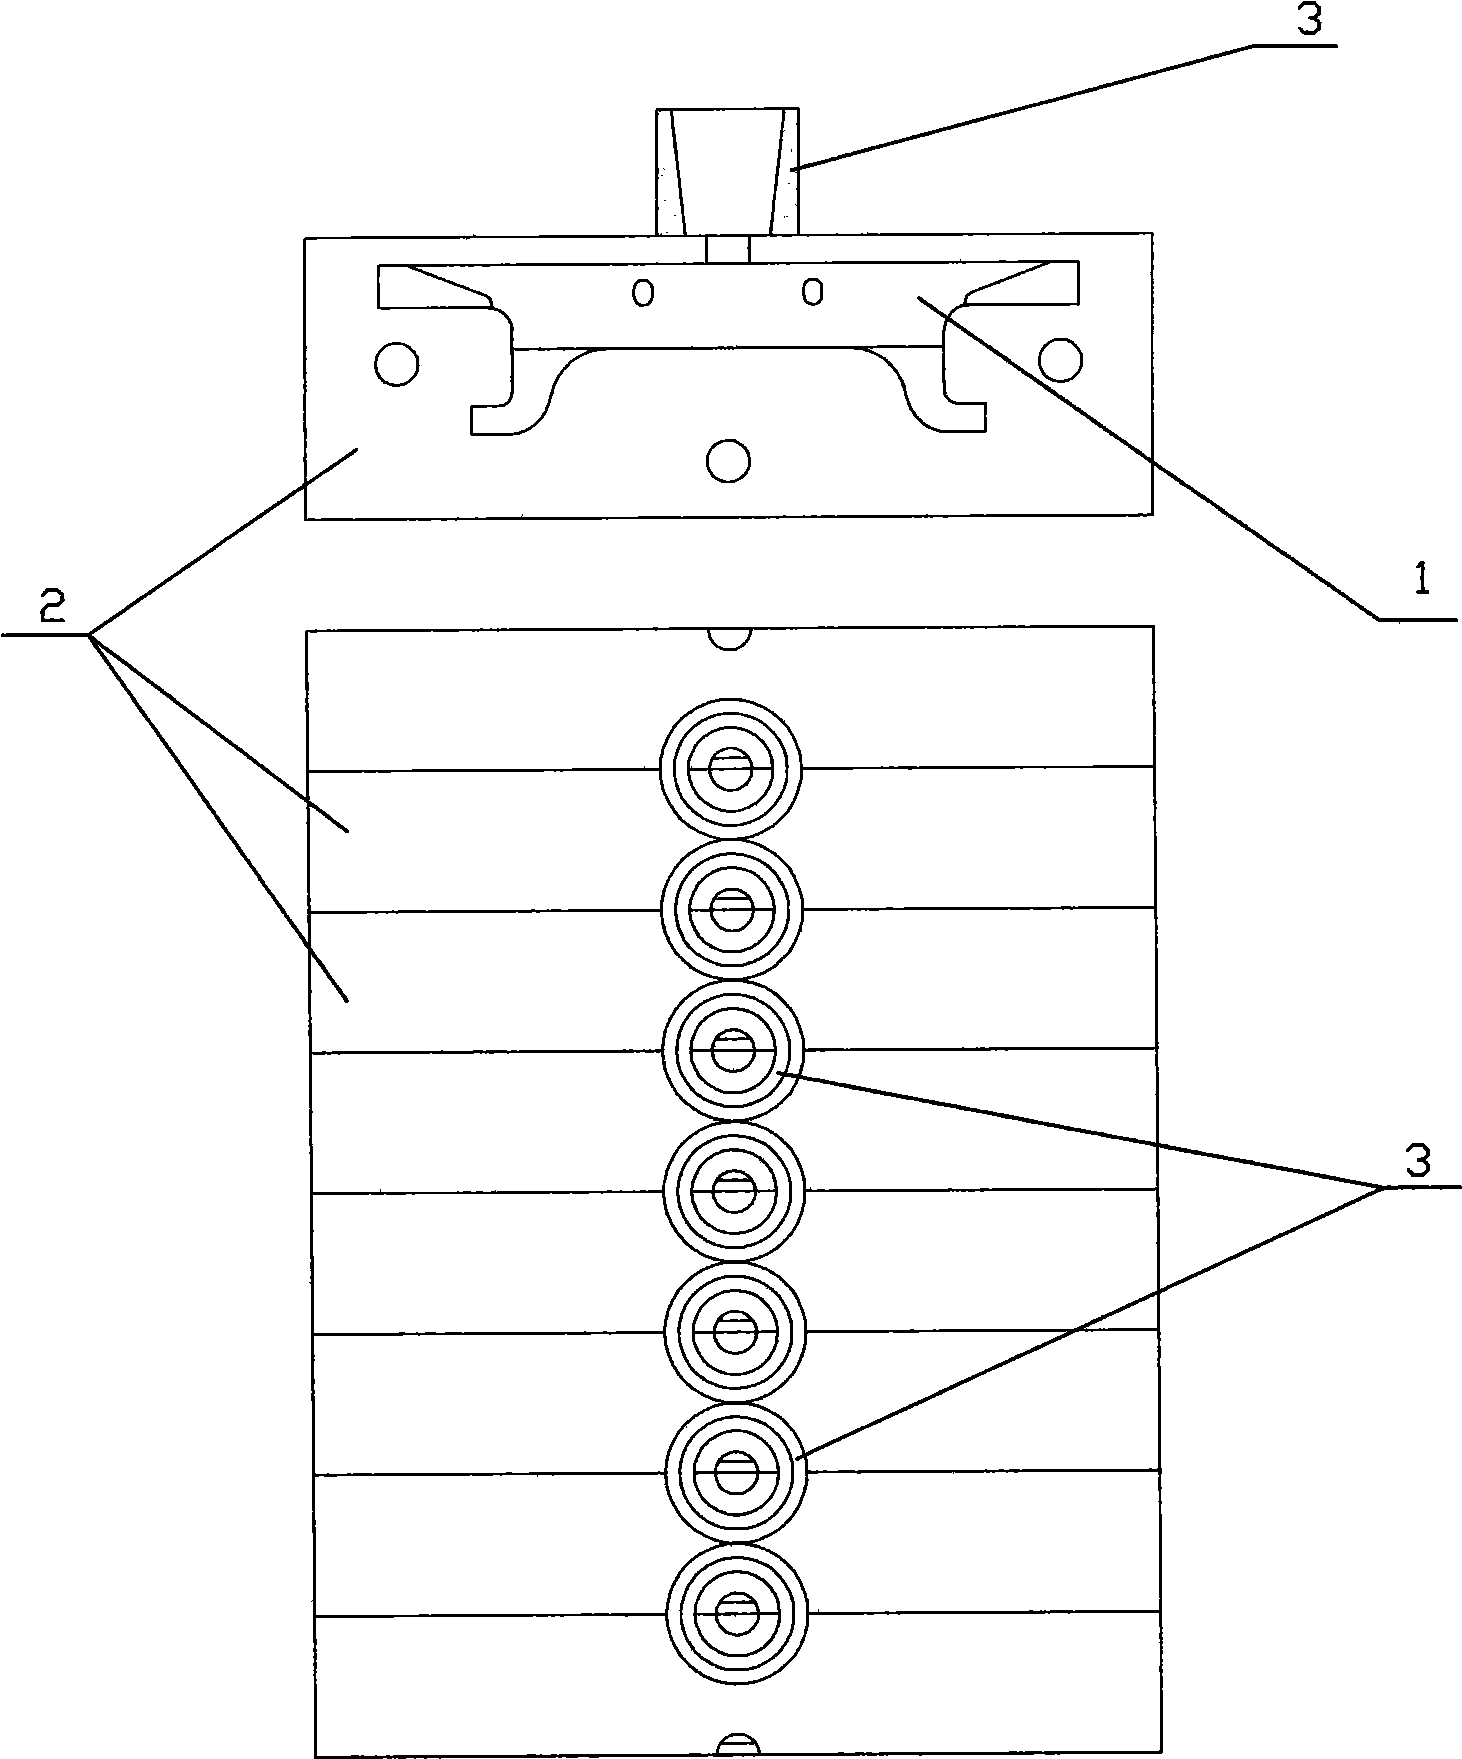 Grate production process for steel mill sintering apparatus